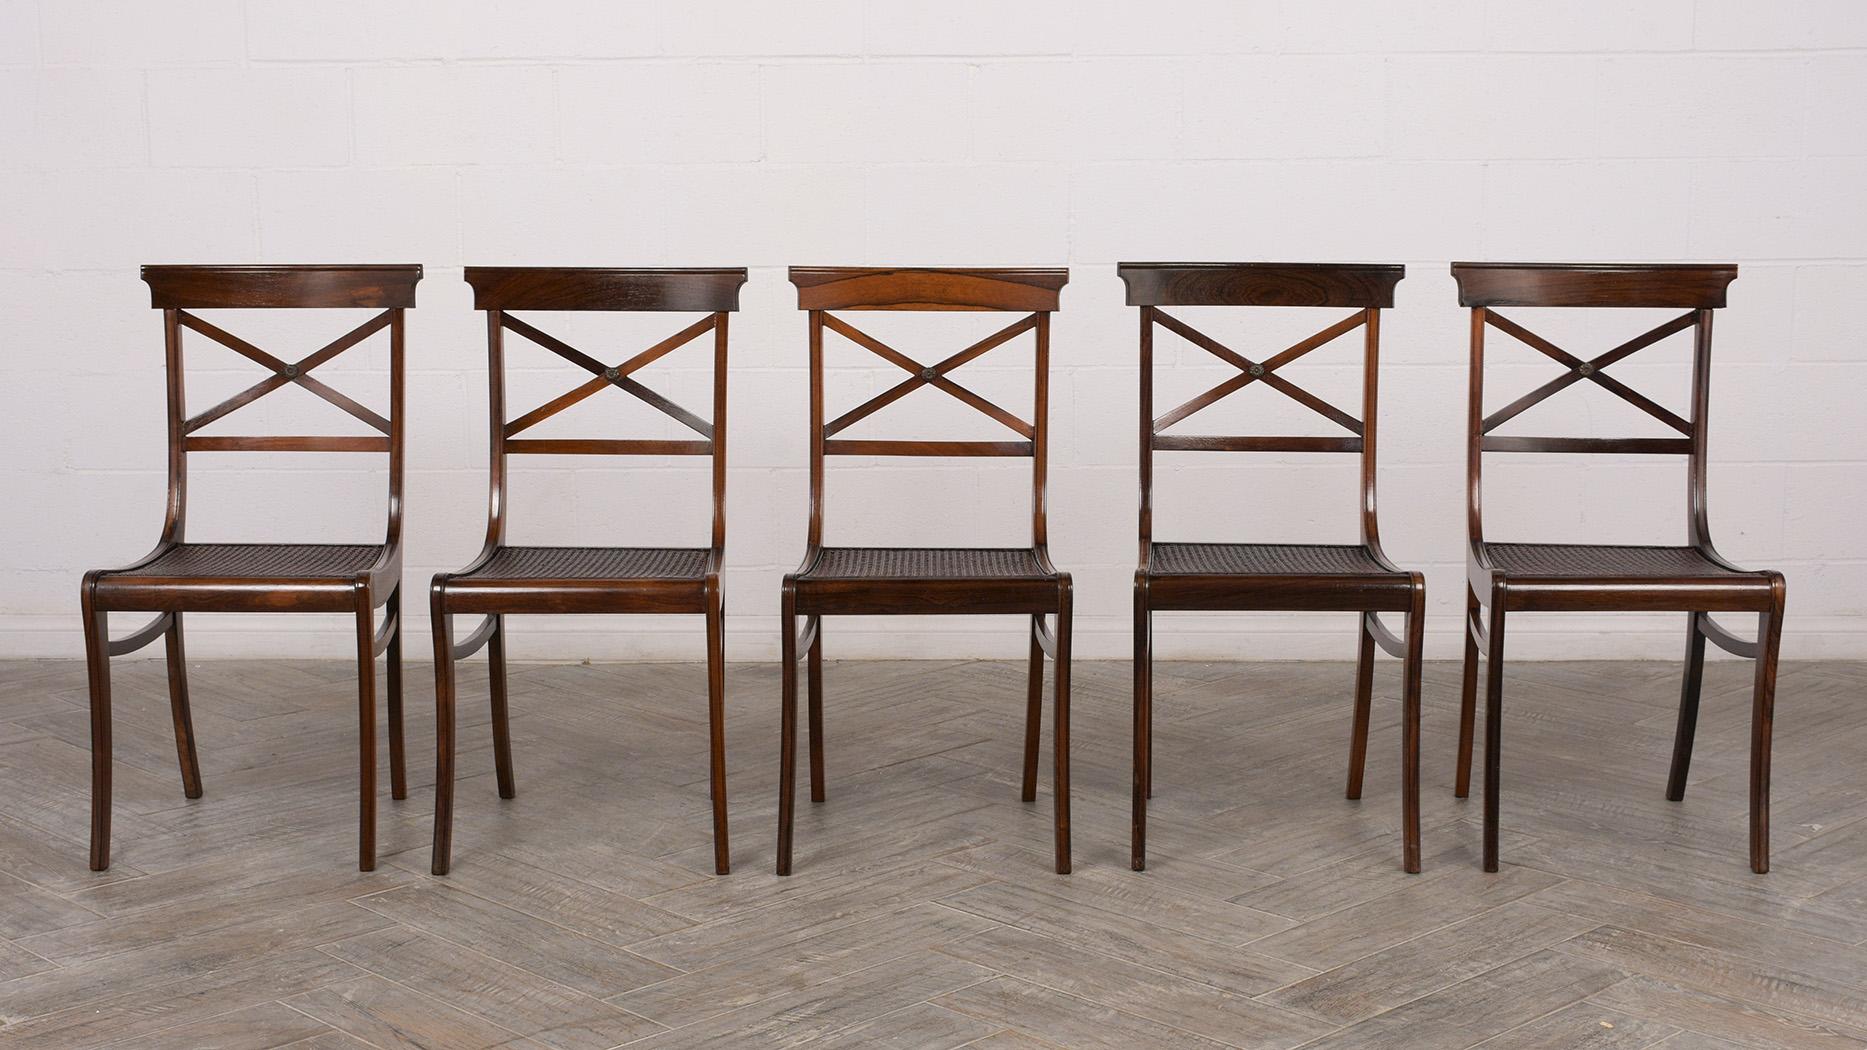 Set of 12 1890s dining chairs in Regency style, 2 armchairs and 10 side chairs. All chairs are made from solid rosewood and have the original rosewood finish. They have been professionally restored, all the caning has been replaced on all seats,